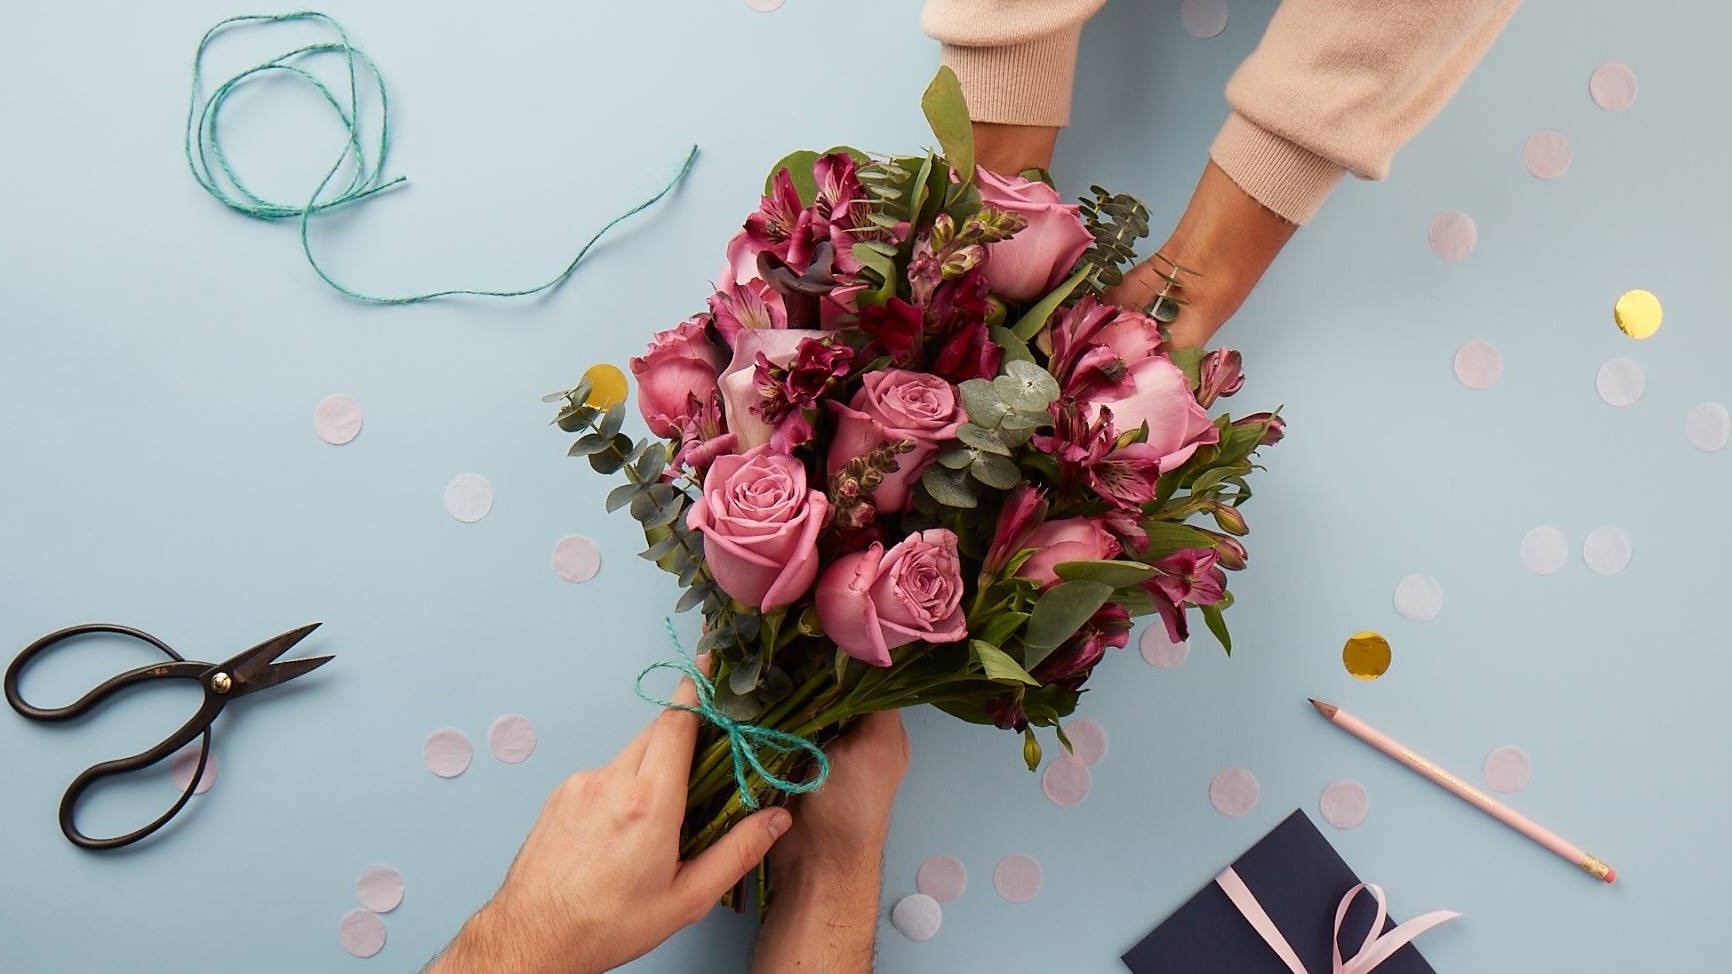 Tips and Tricks to Get the Best Flowers and Avoid the Trouble of Ordering